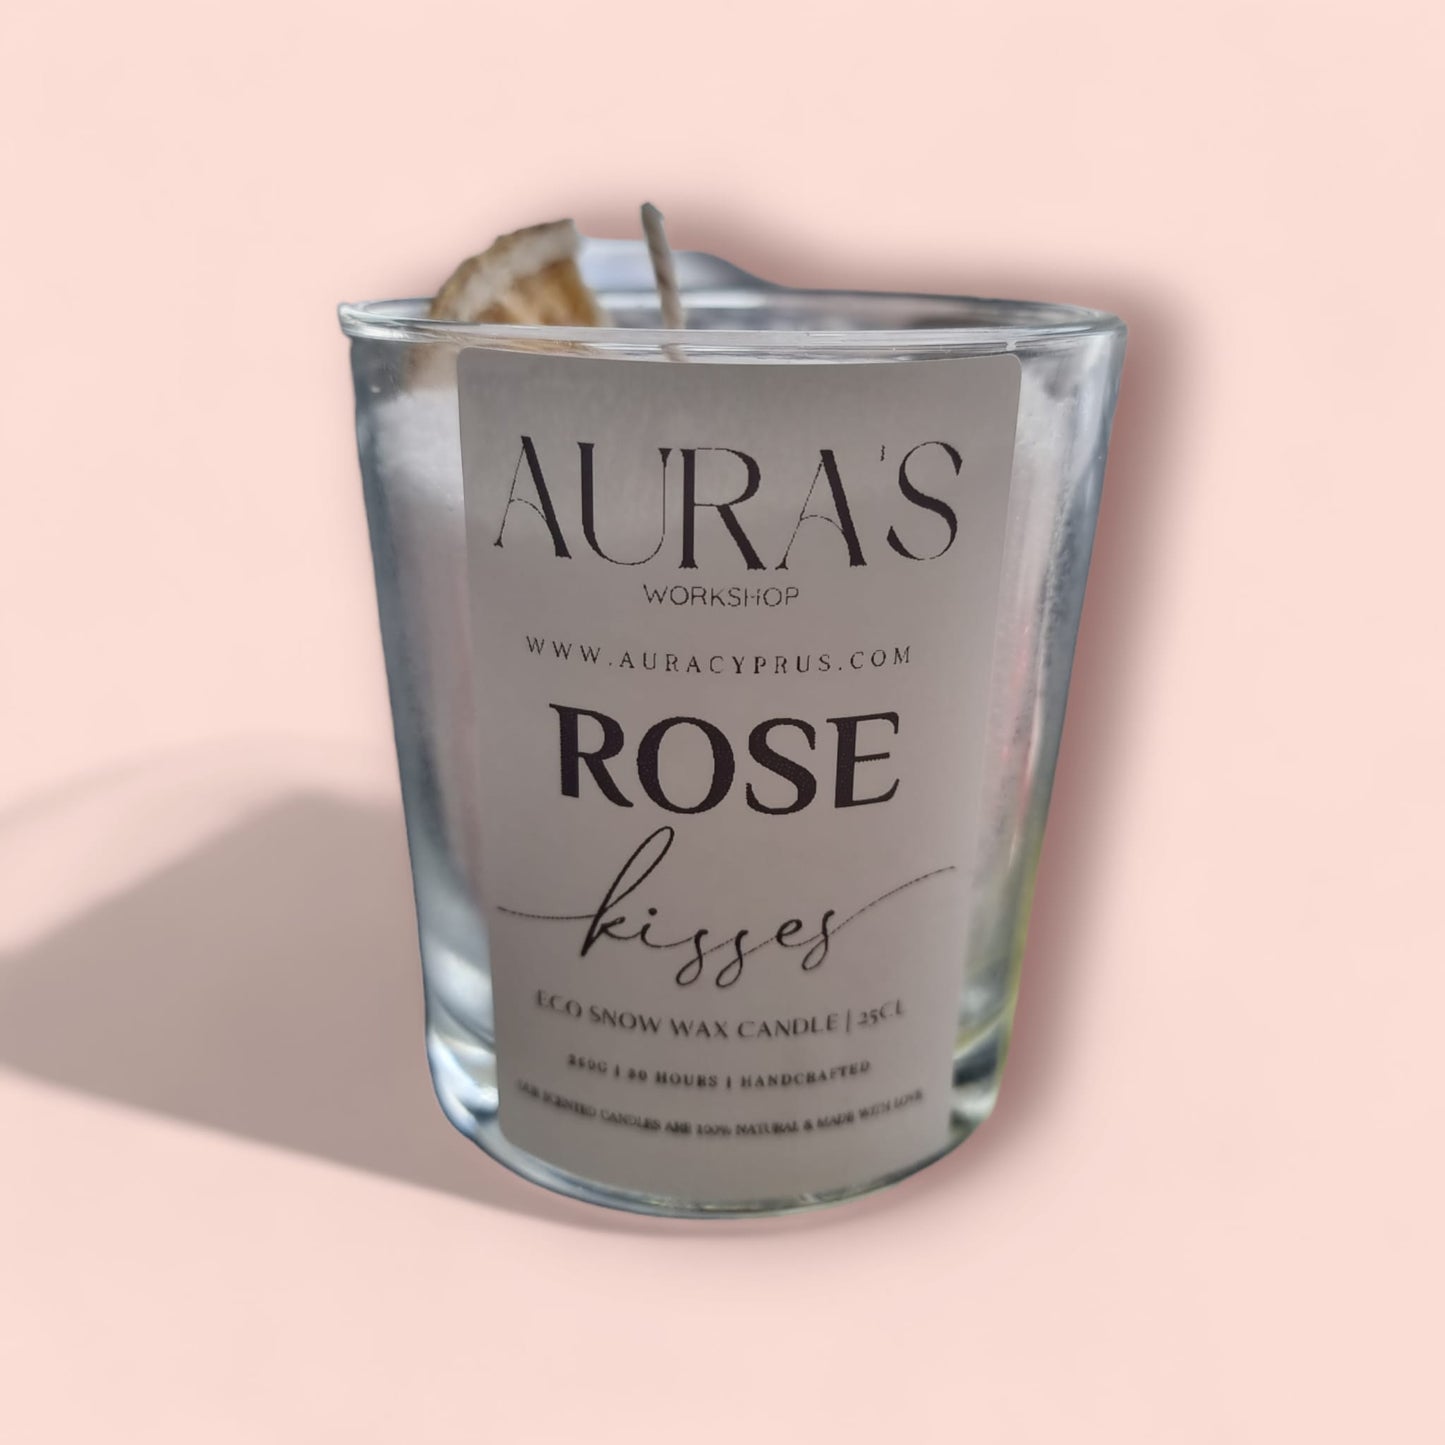 Rose Kisses Scent - Eco Snow Candle - Auras Workshop  -  Candles -   - Cyprus & Greece